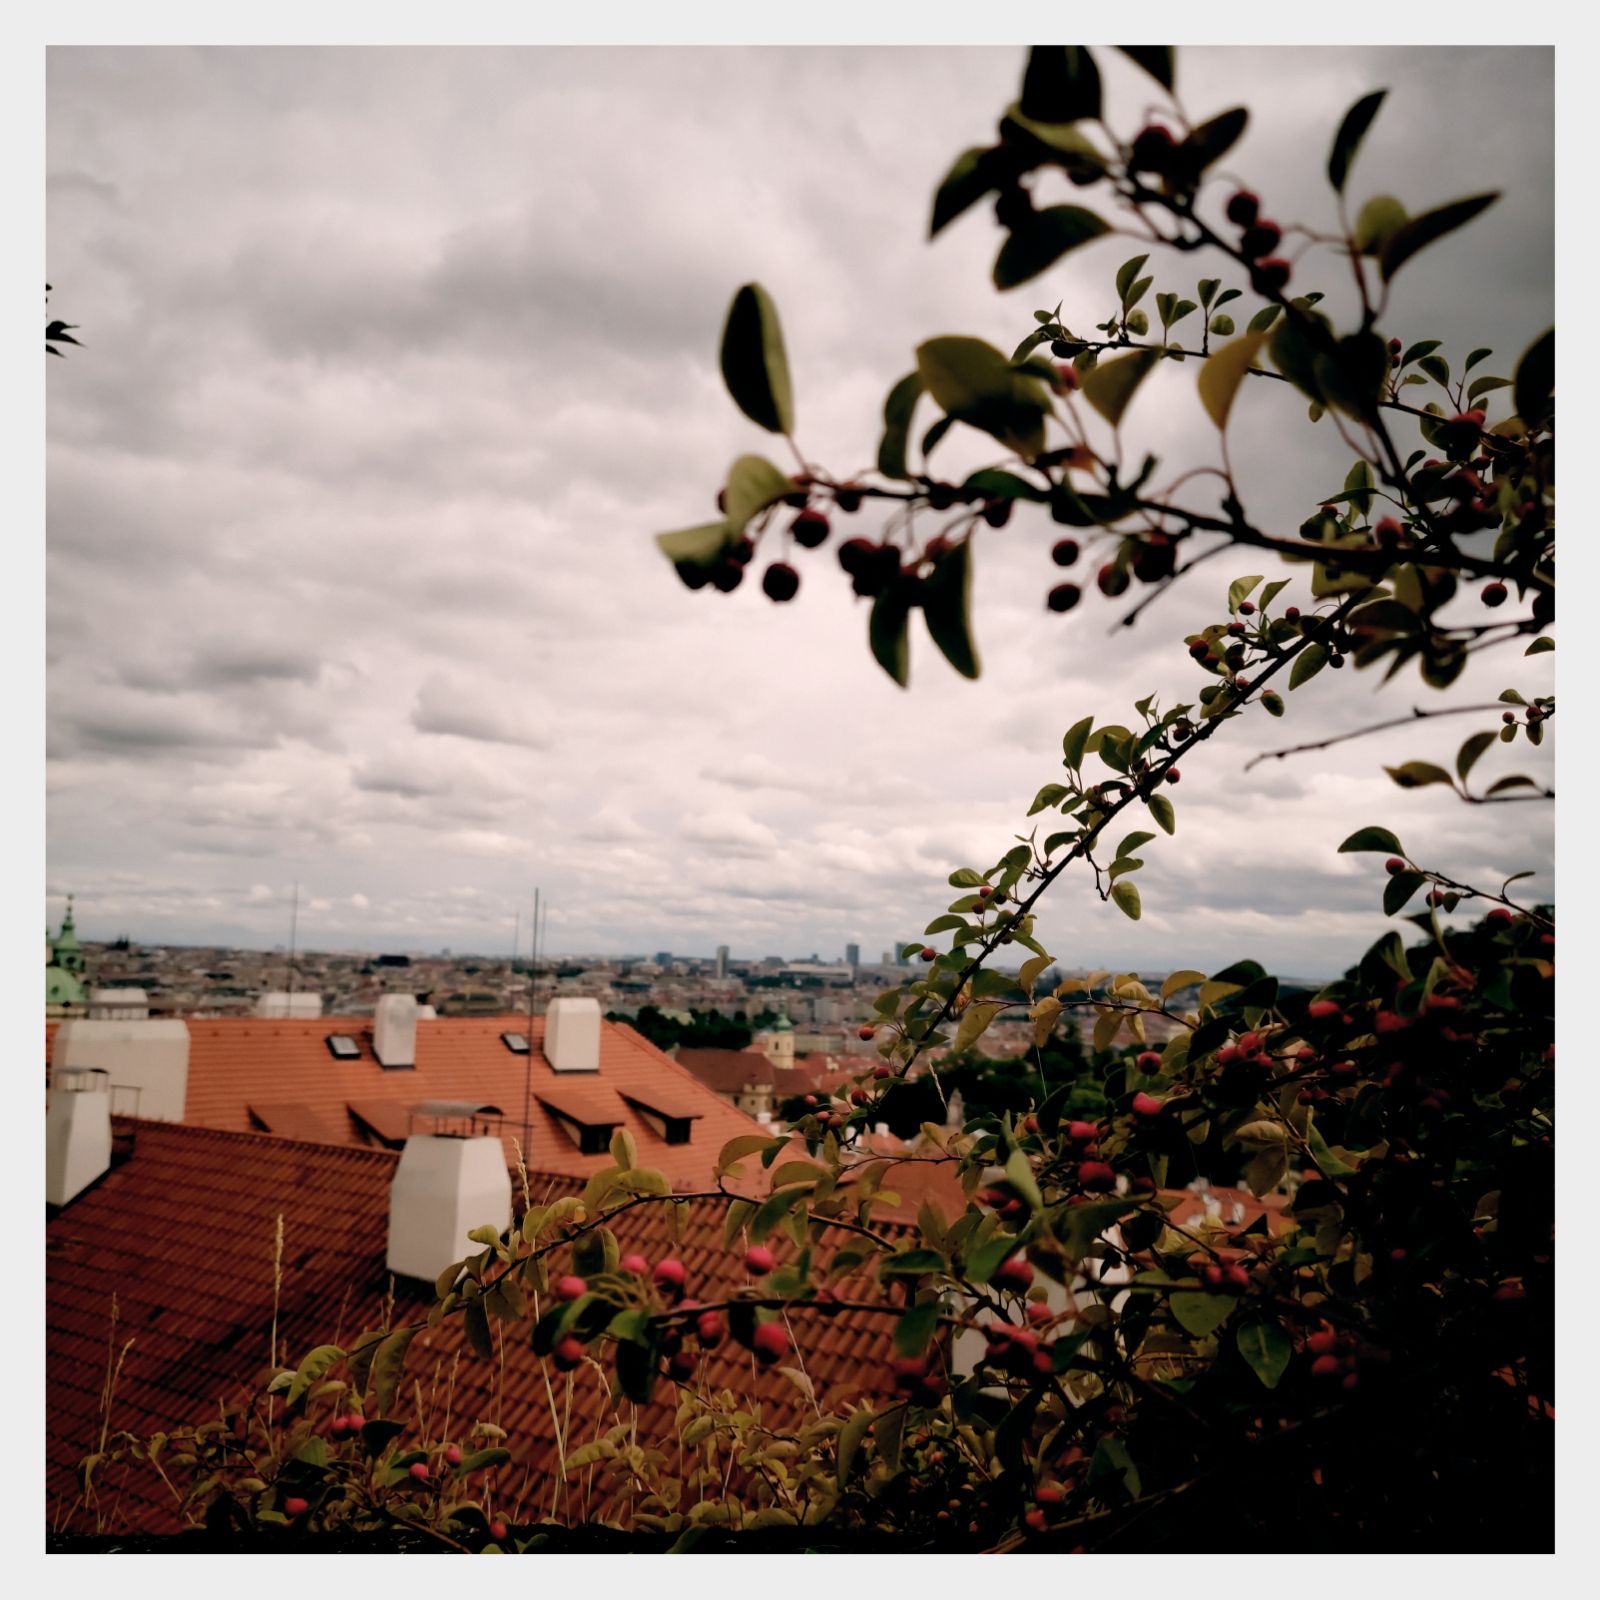 Part of Prague skyline seen from the castle. Berries in the foreground